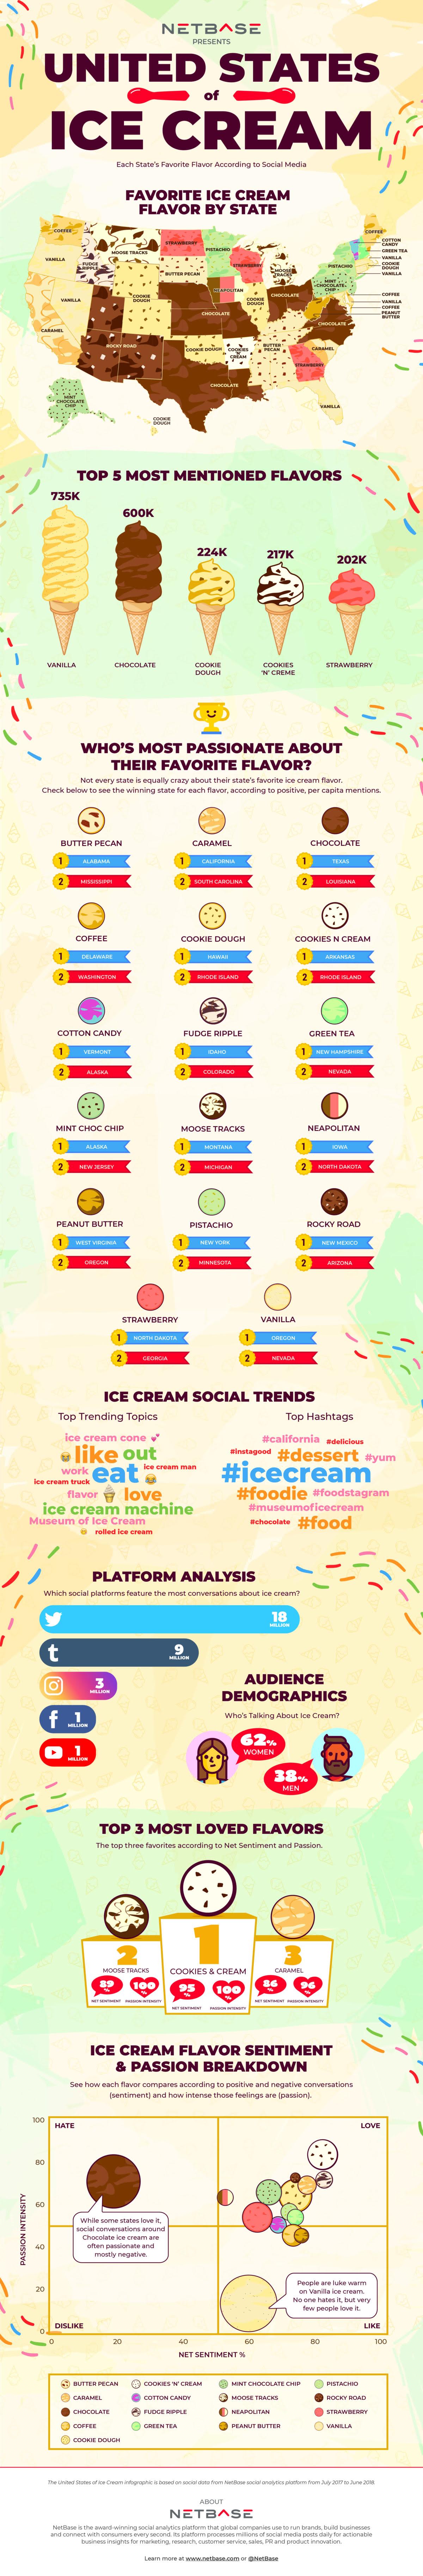 Your State’s Favorite Flavor Of Ice Cream, According To Social Media #infographic